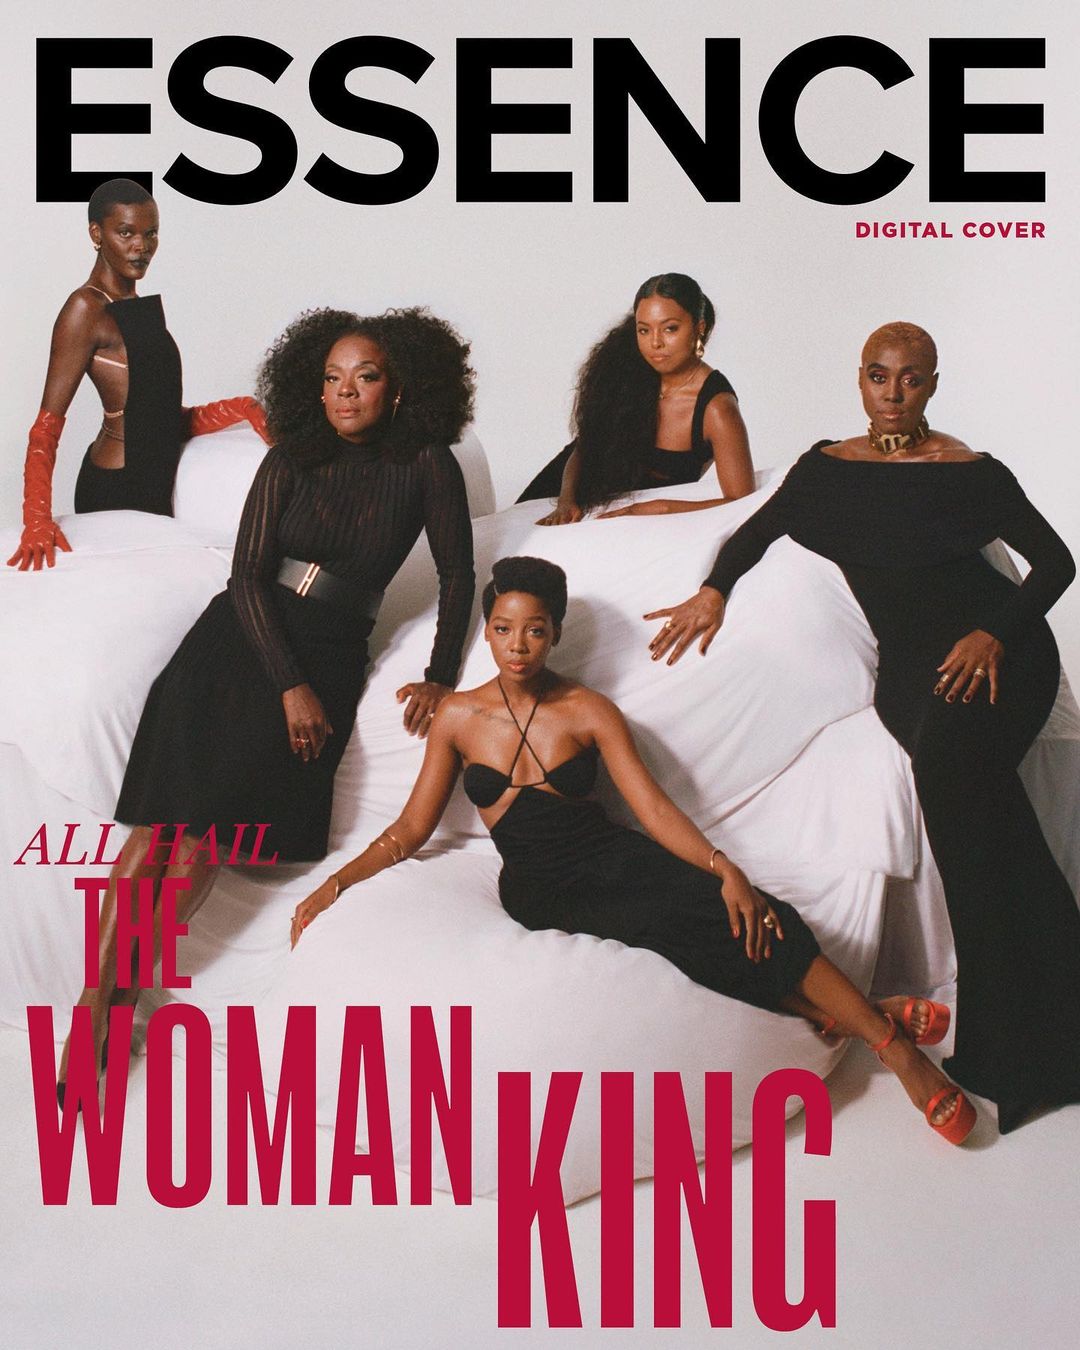 The Cast of "The Woman King" Celebrates Sisterhood as they Cover ...